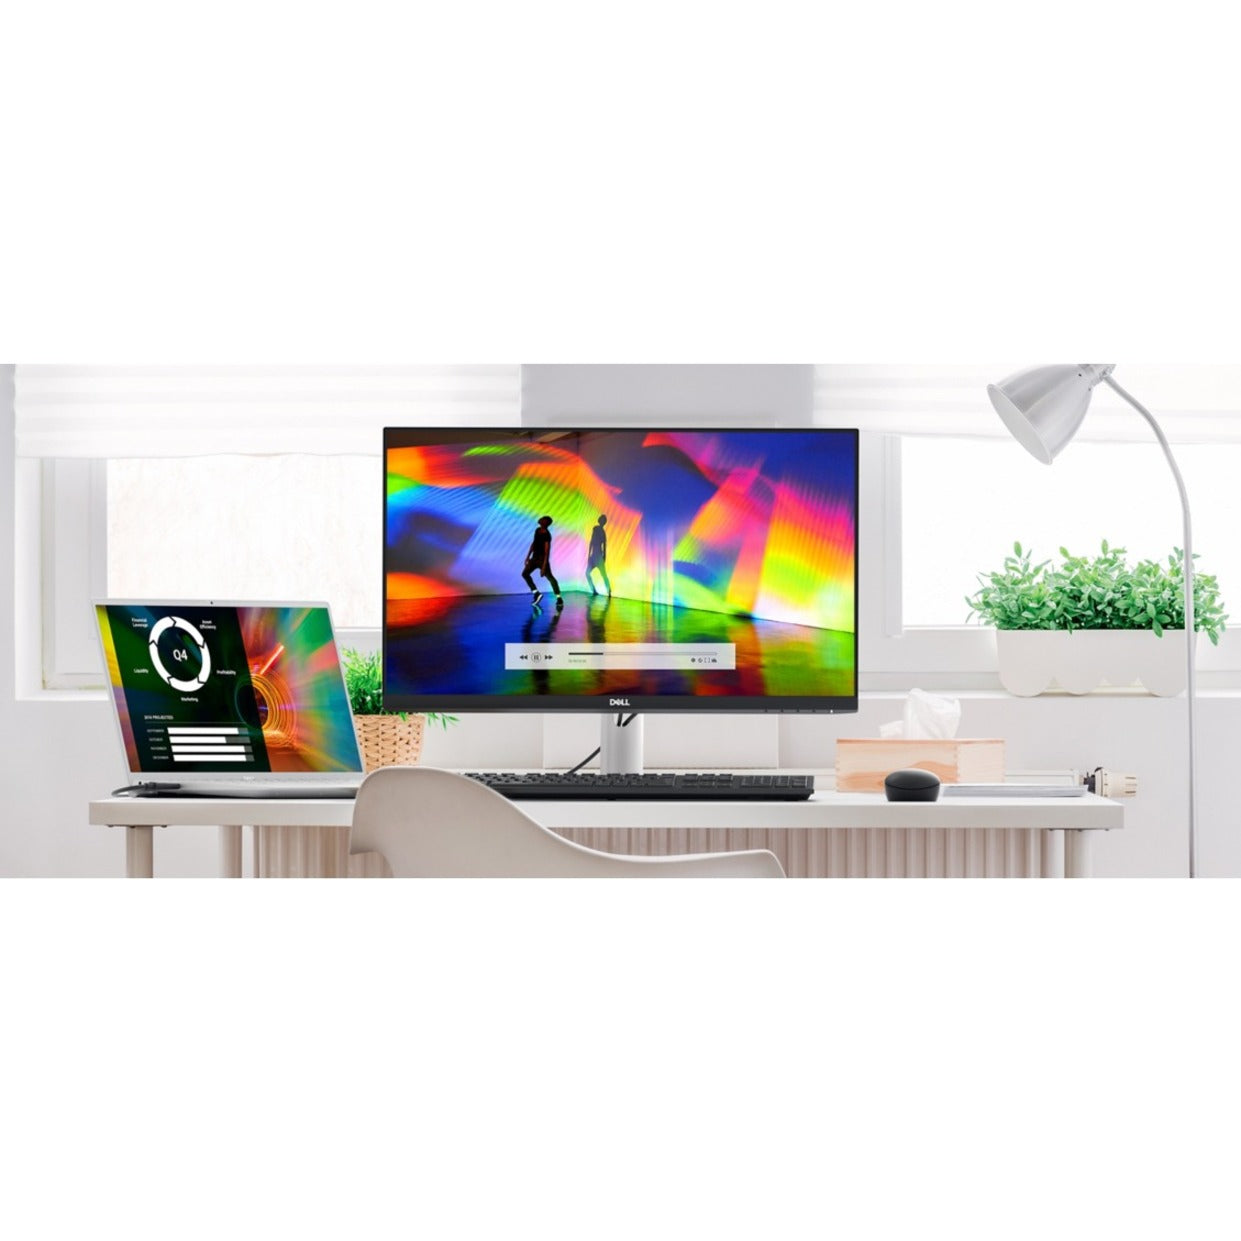 Dell S2721HN 27" Full HD LCD Monitor, Stunning Visuals and Immersive Viewing Experience